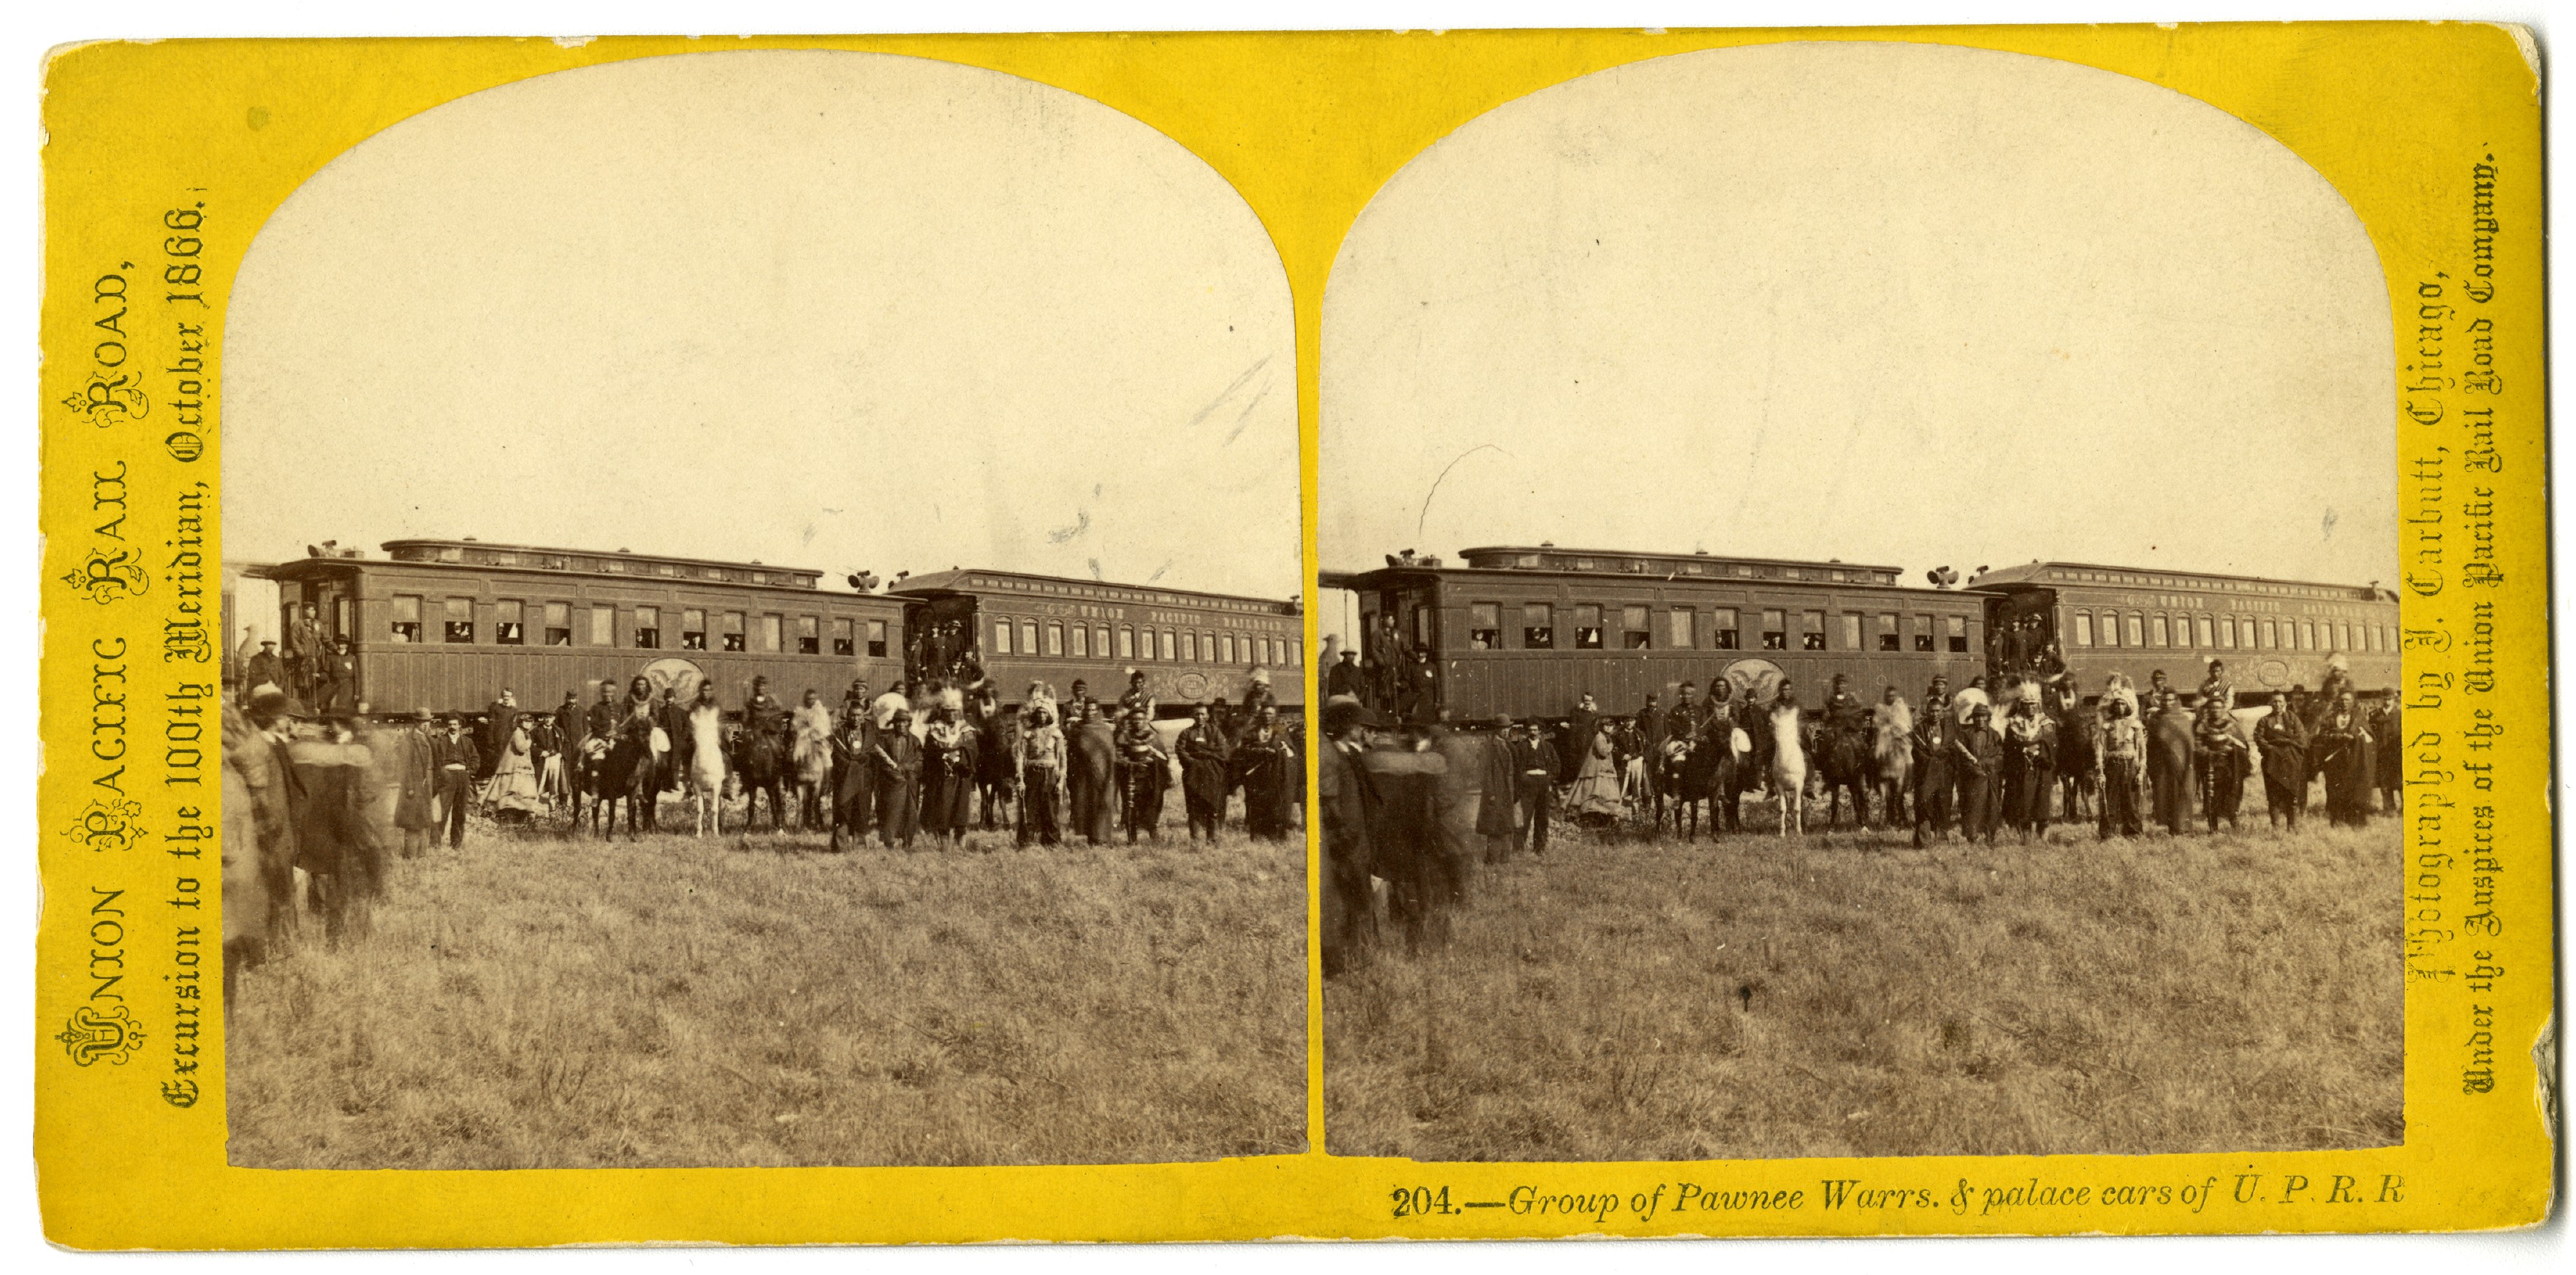 This image shows a company of Pawnee Scouts and Union Pacific excursionists arranged in front of the excursion train